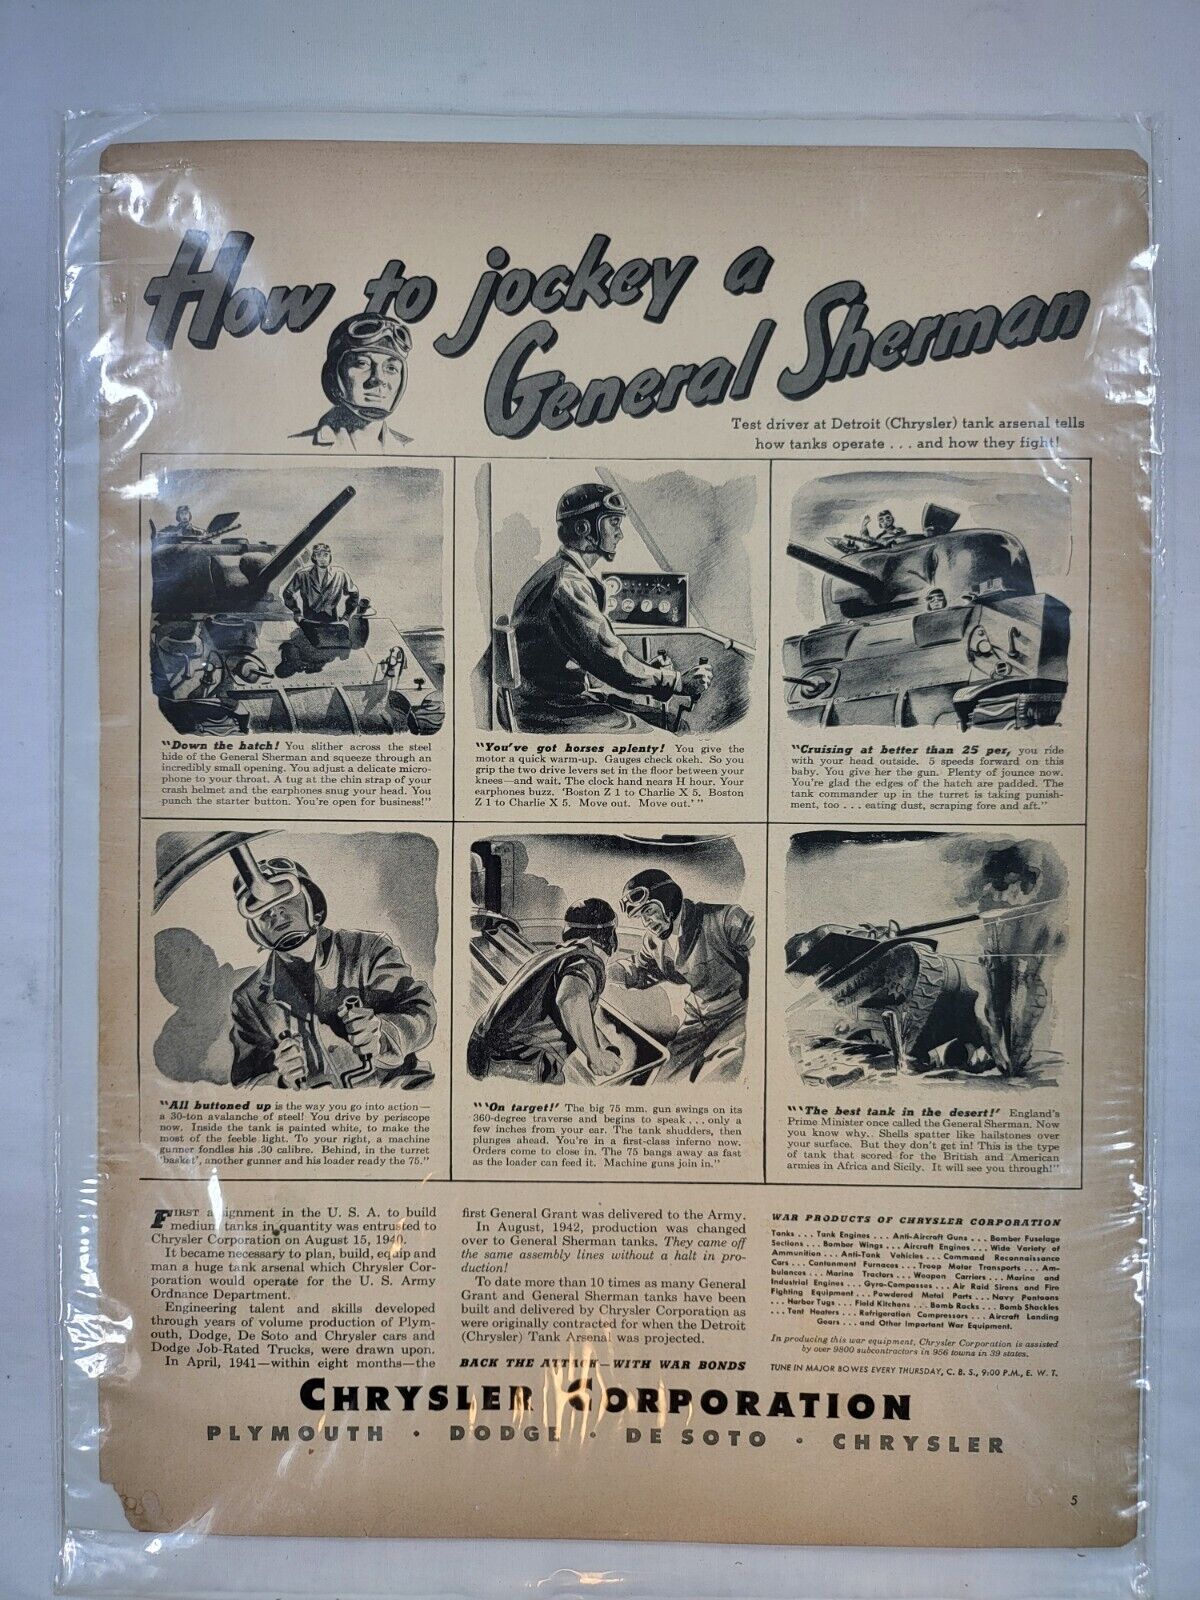 1940's Chrysler WWII How to Jockey a General Sherman Tank Home Front Print Ad